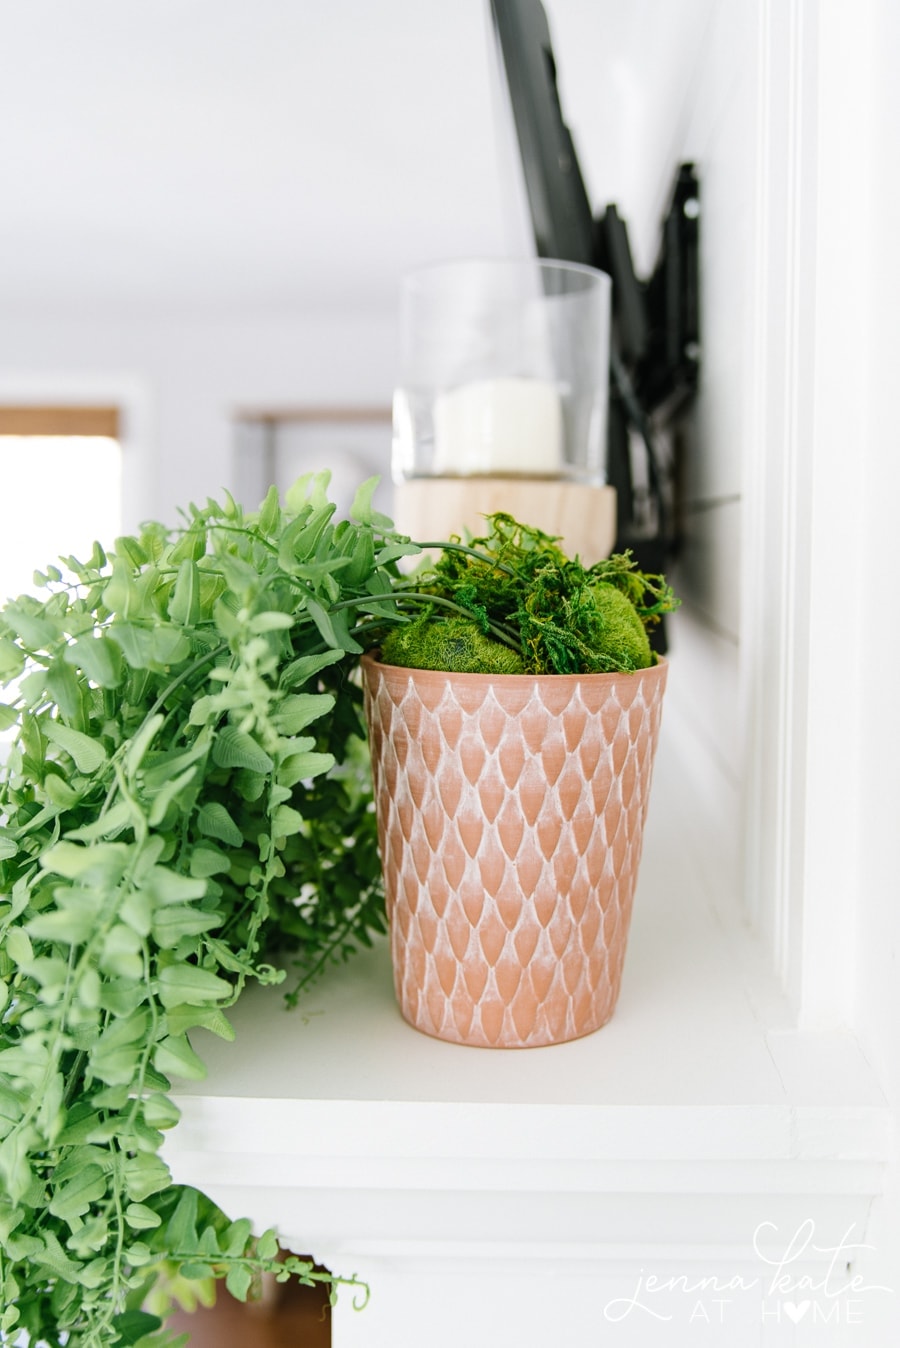 Faux moss and rocks help conceal the stems of your potted faux trailing plant